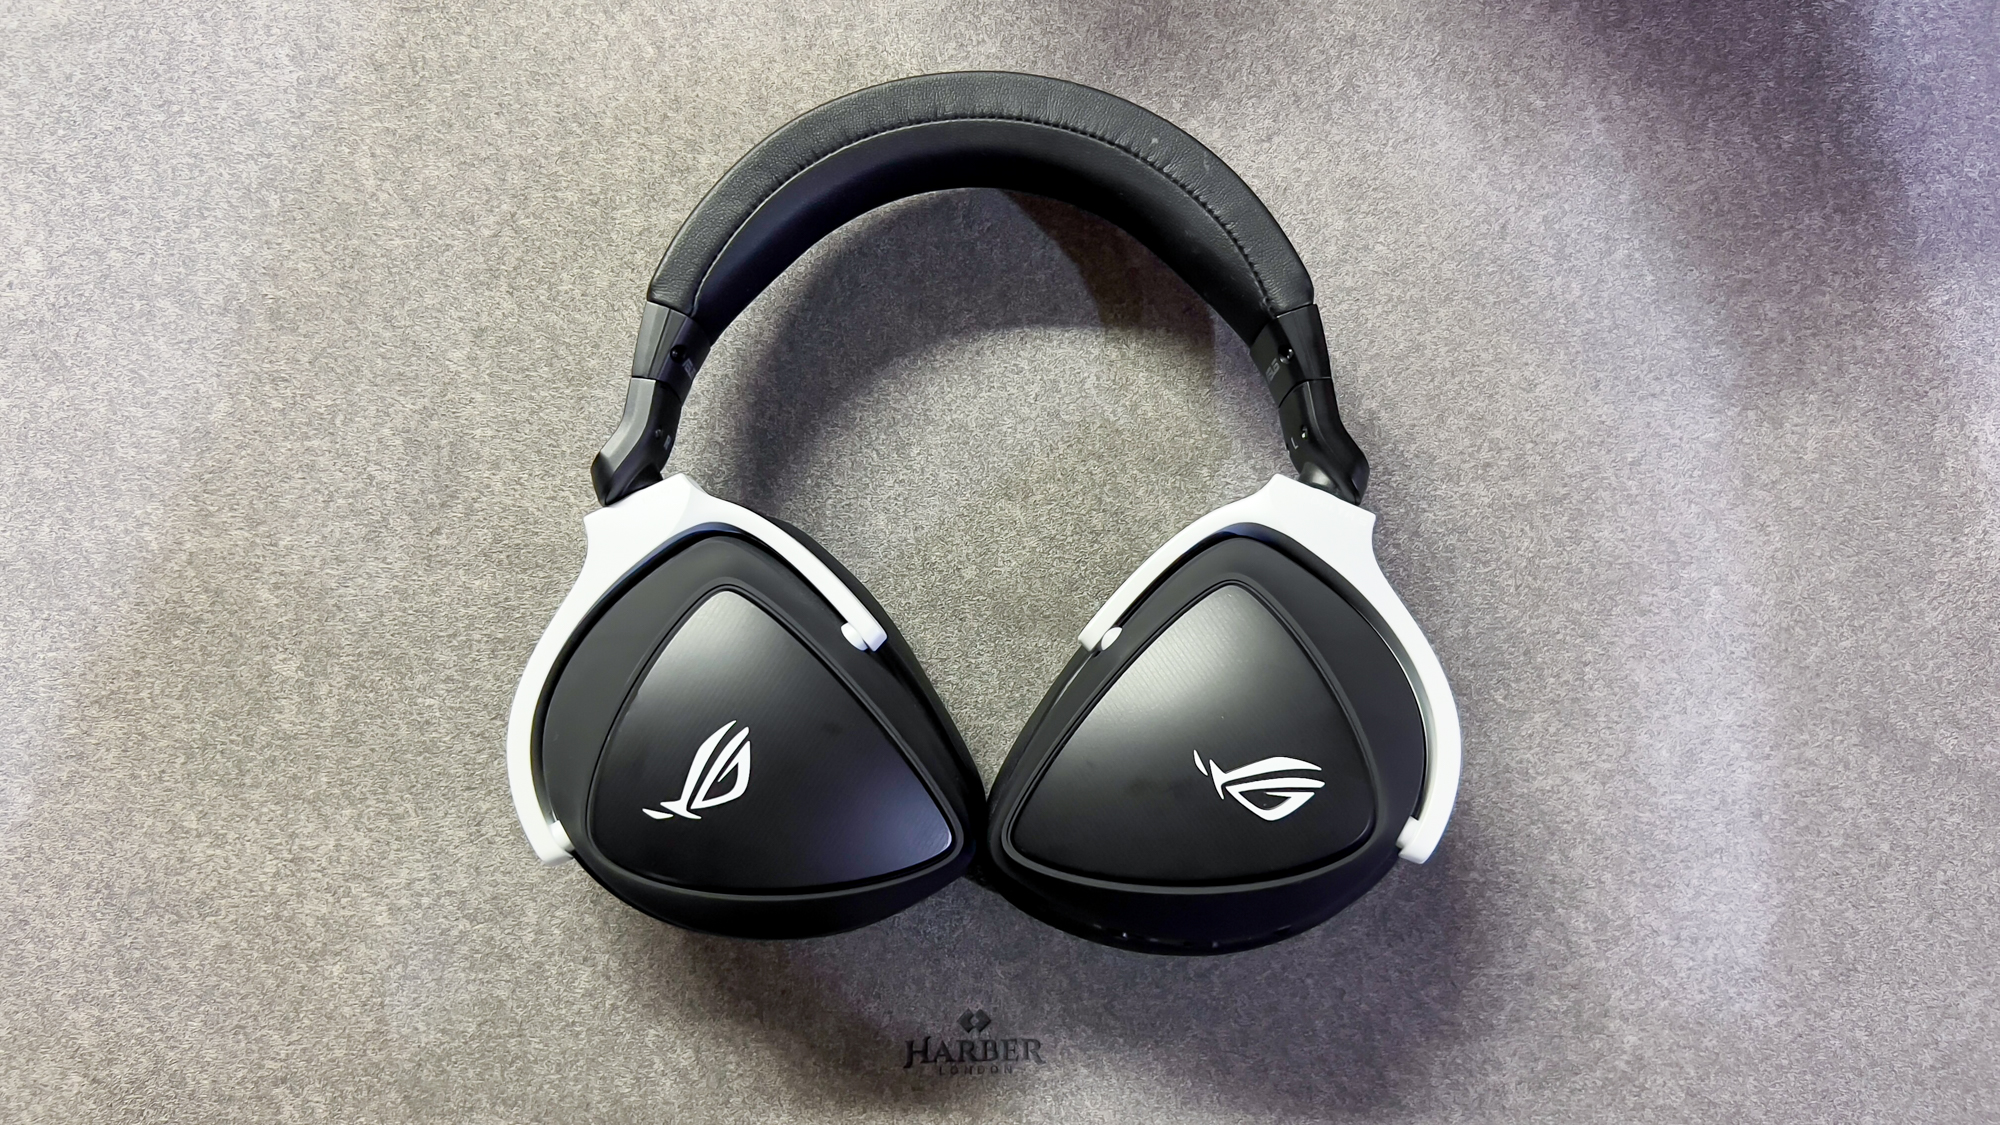 Asus ROG Delta S review: High-quality sound and RGB lighting